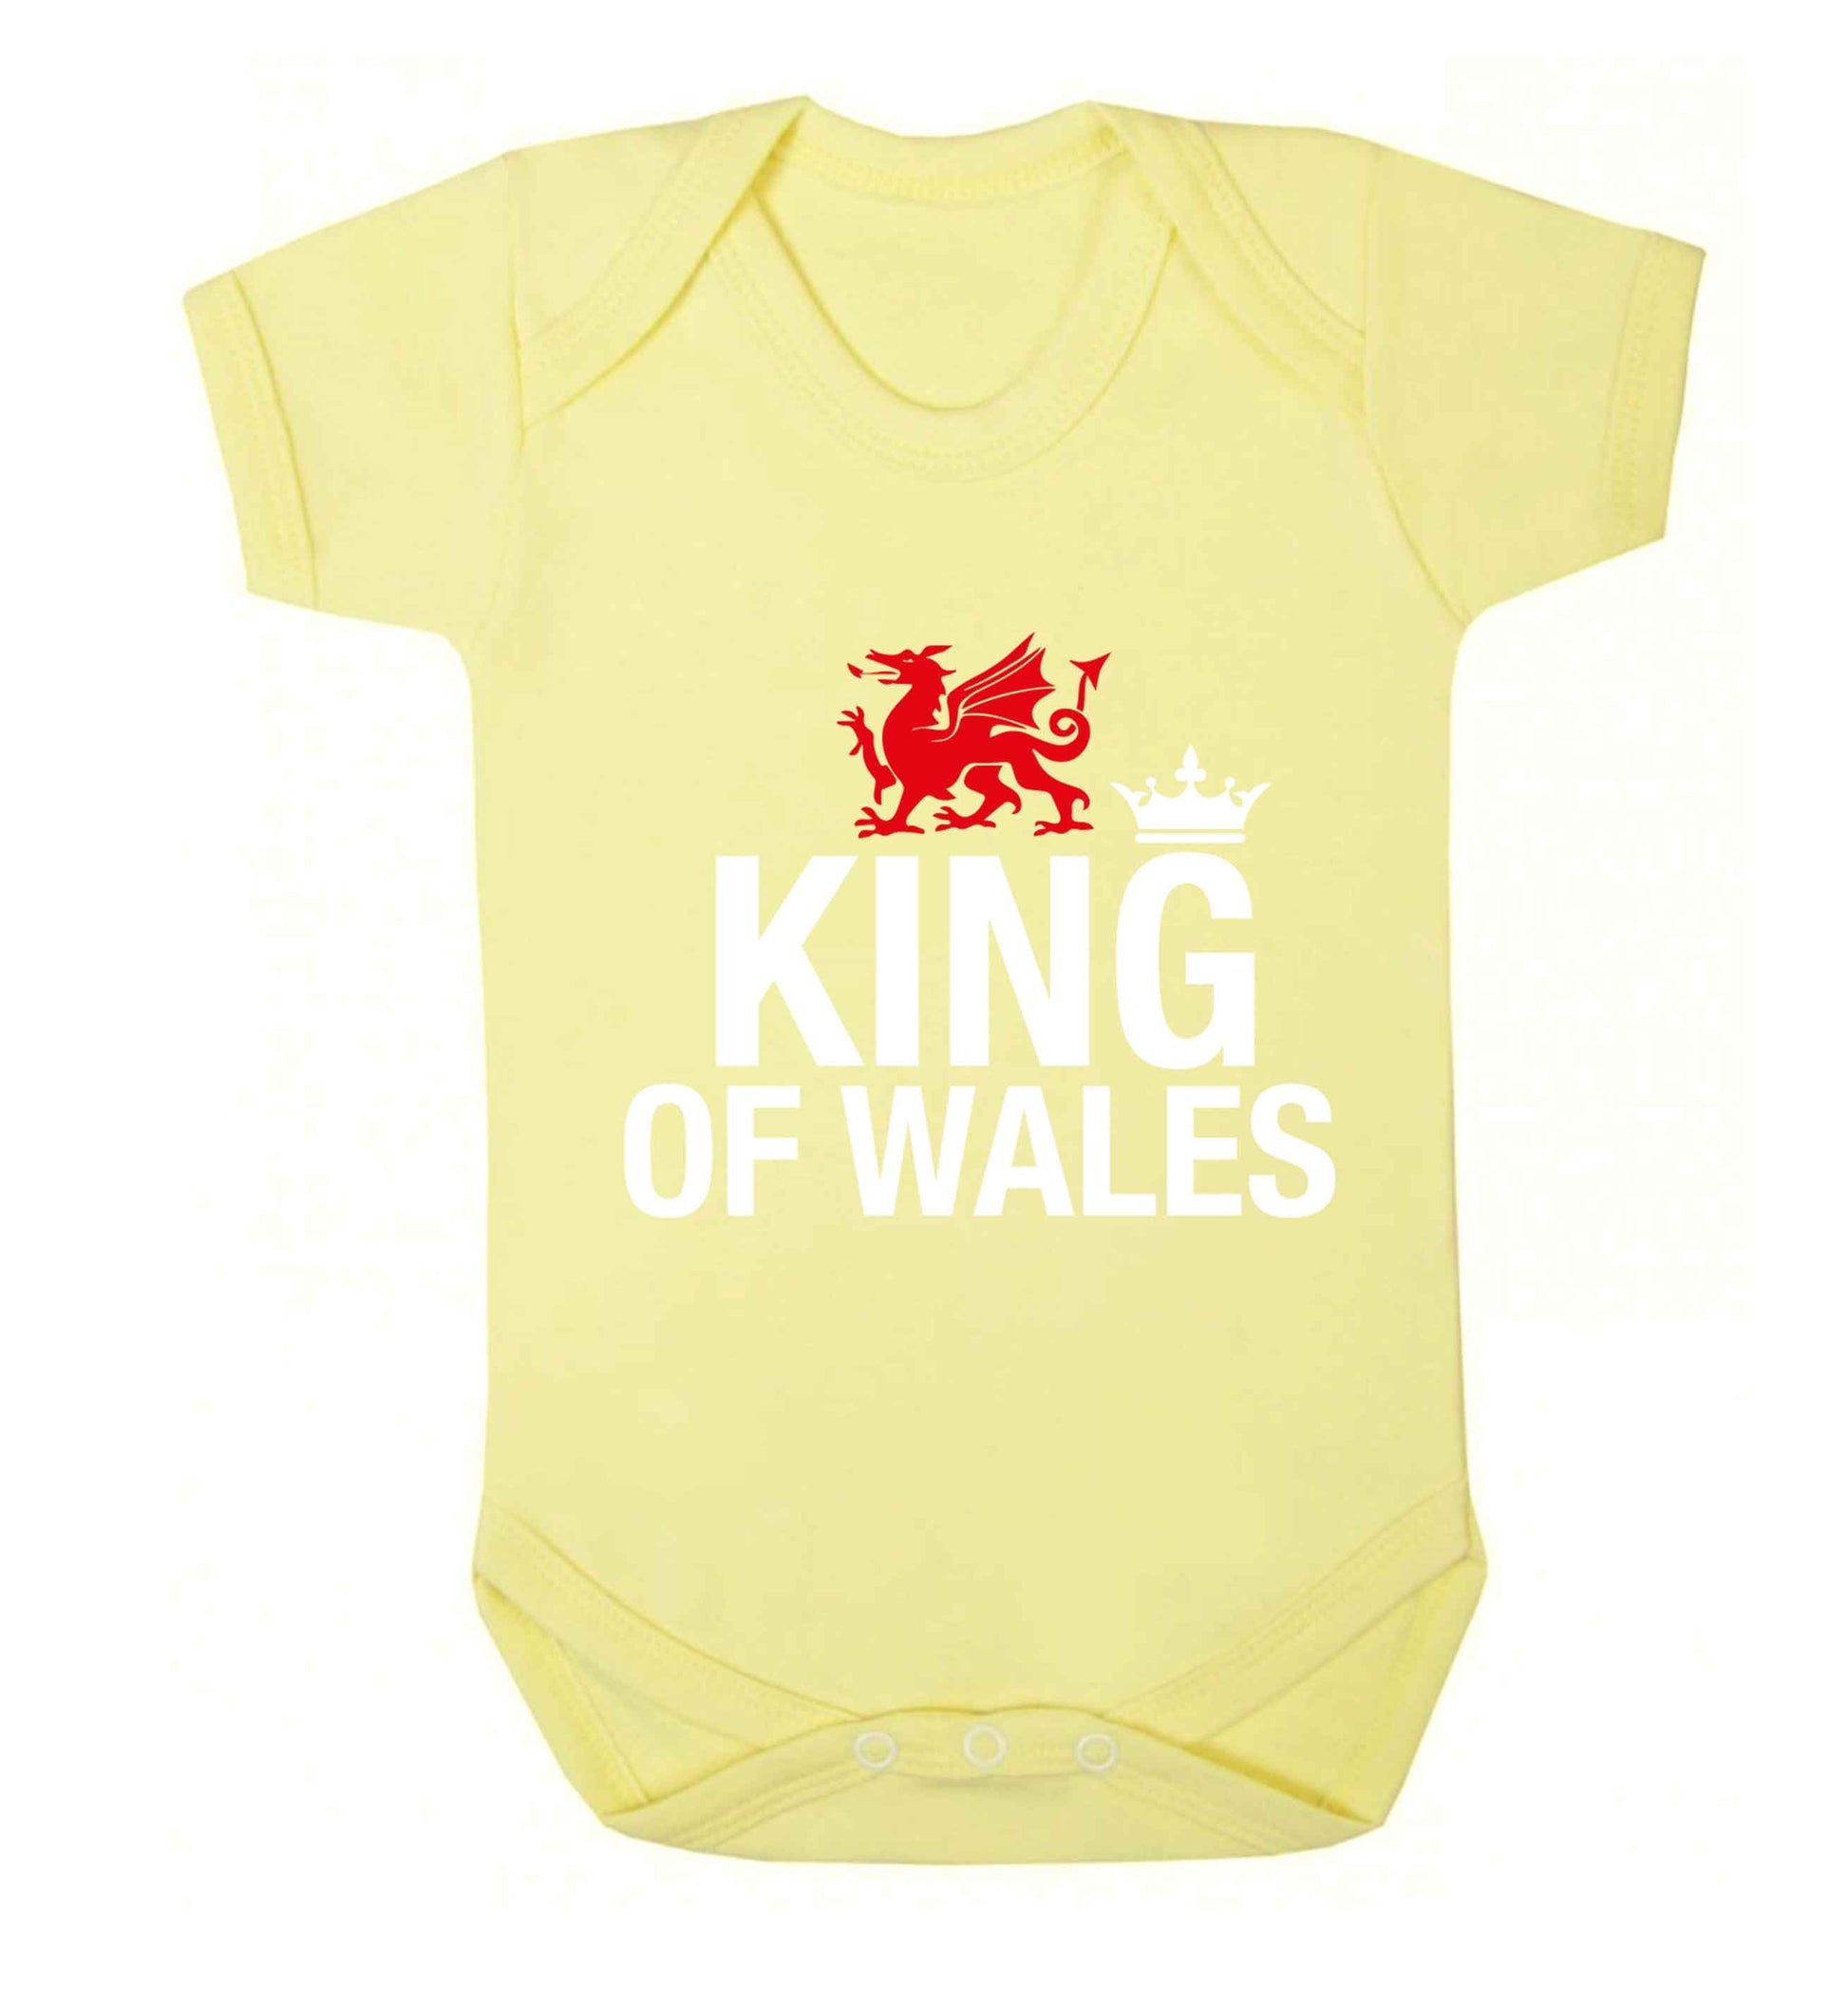 King of Wales Baby Vest pale yellow 18-24 months